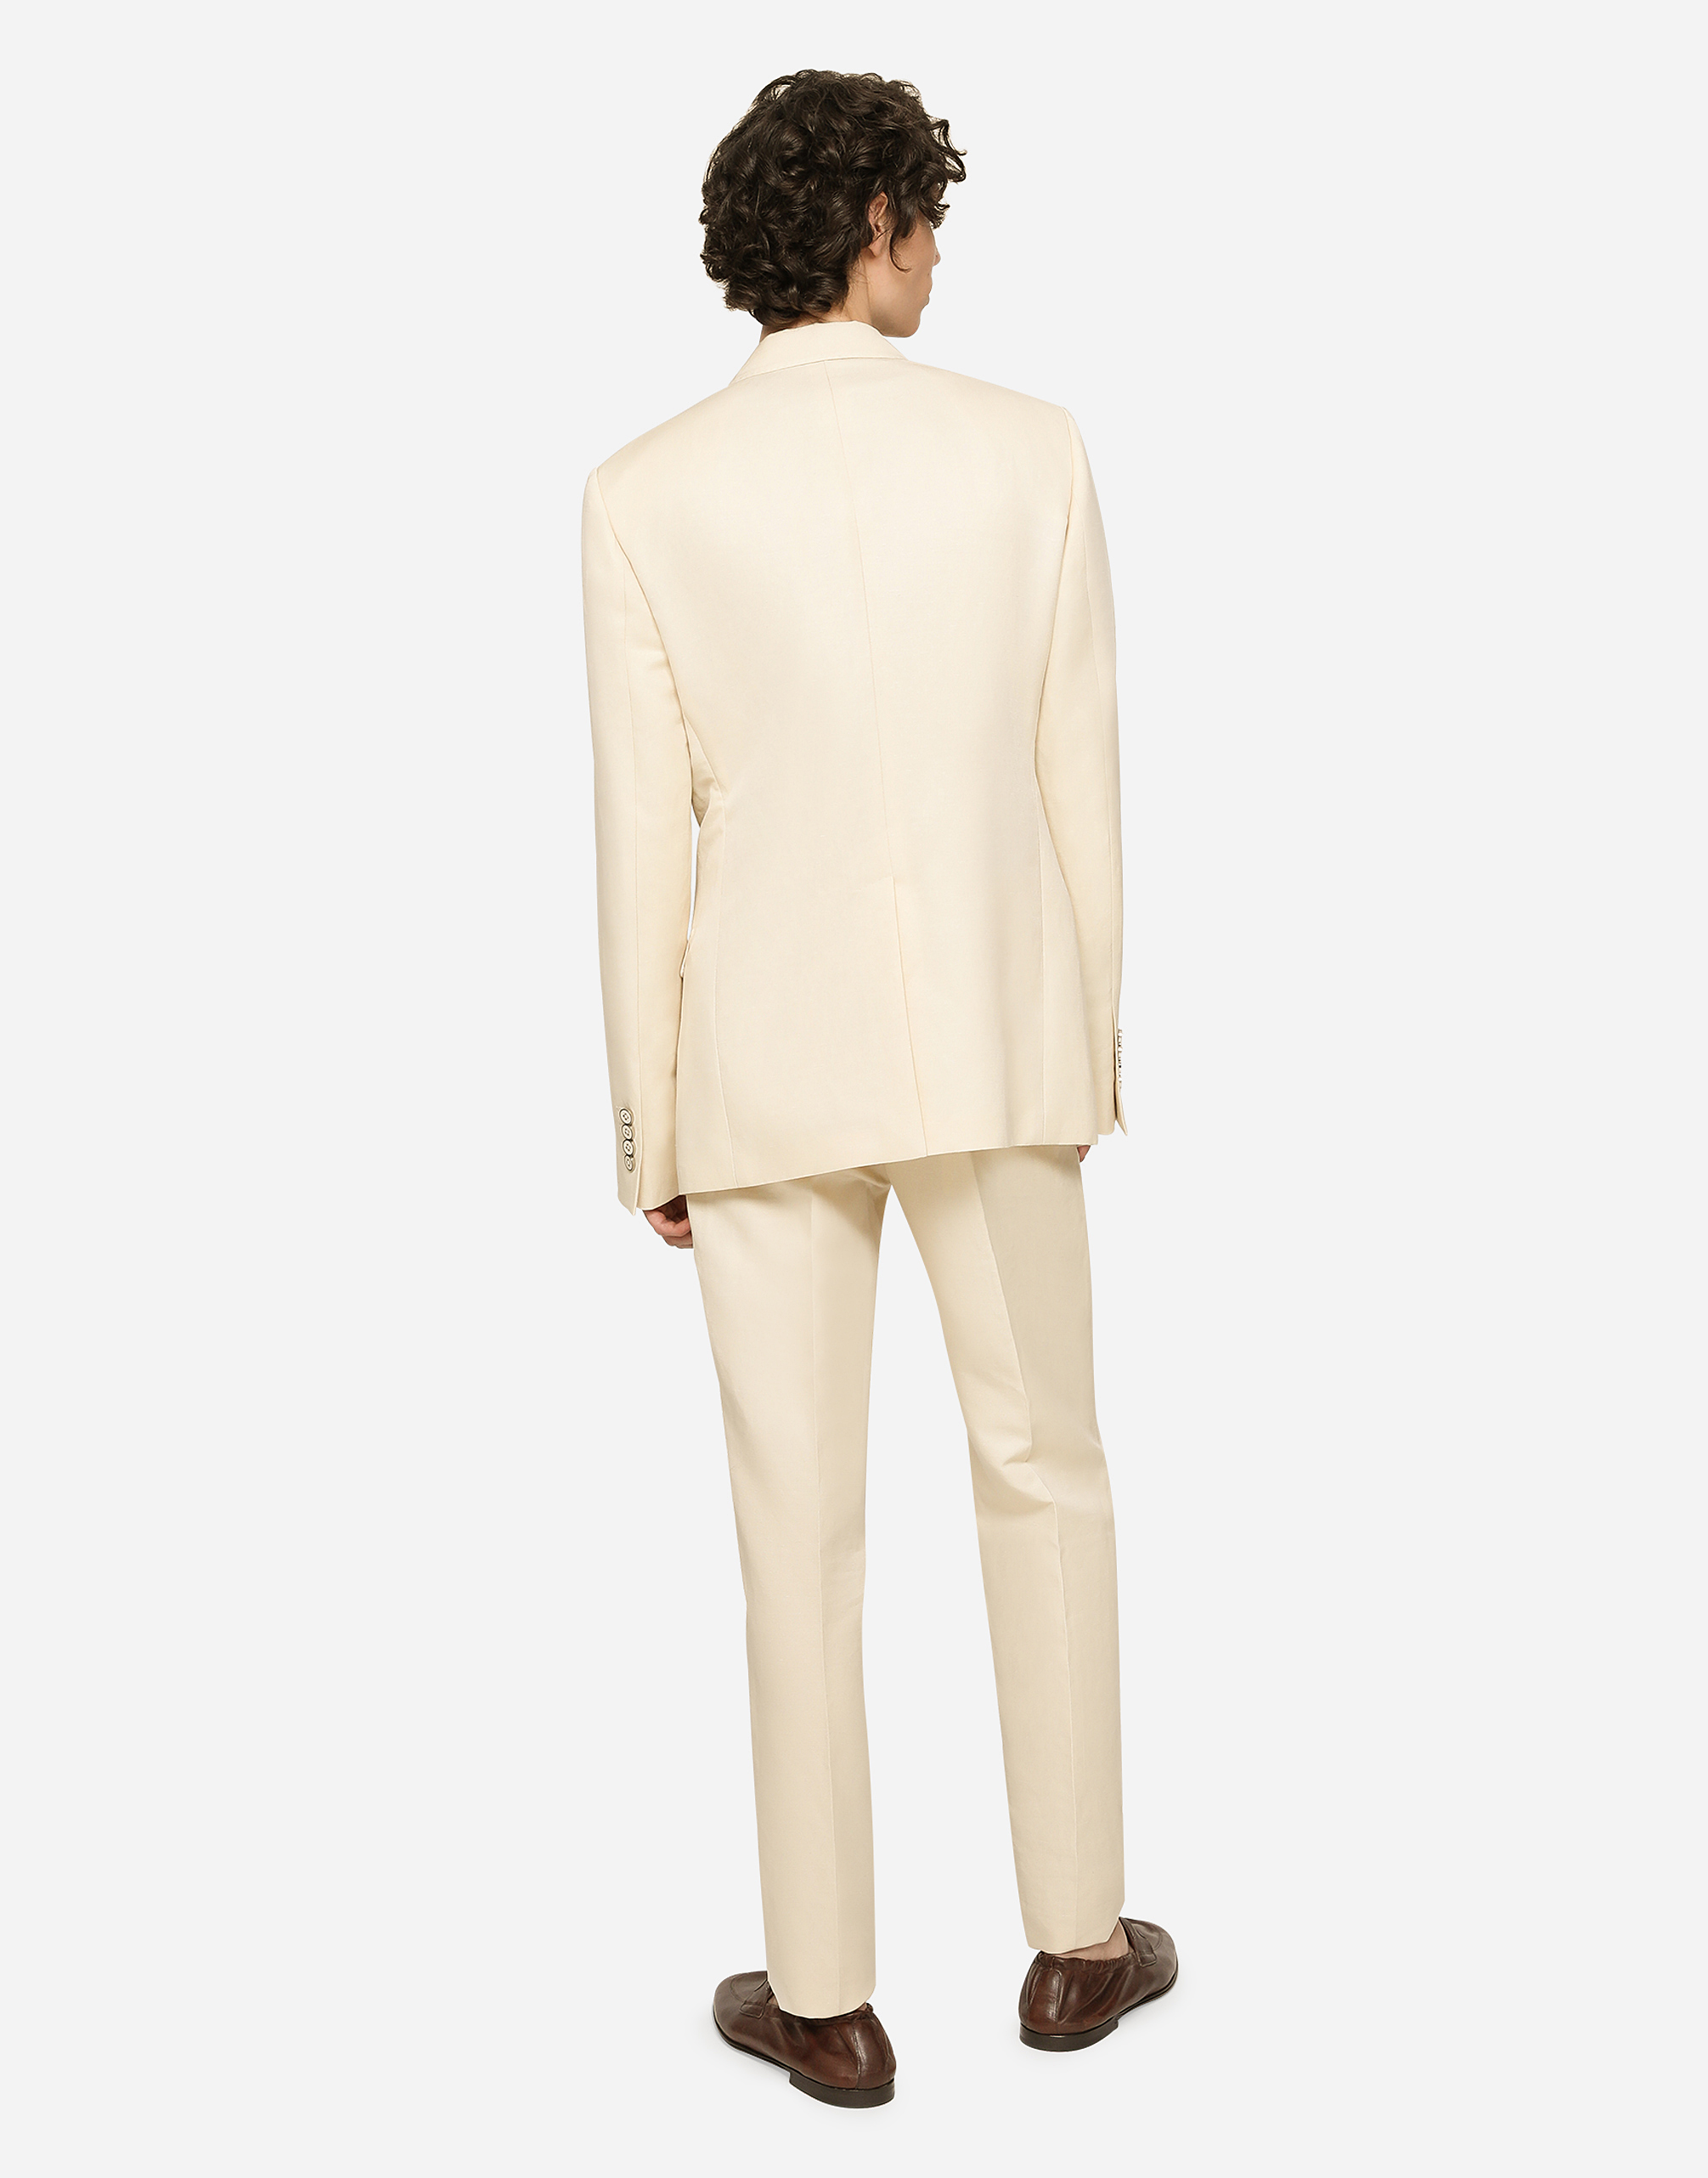 Single-breasted Taormina jacket in linen, cotton and silk in White 